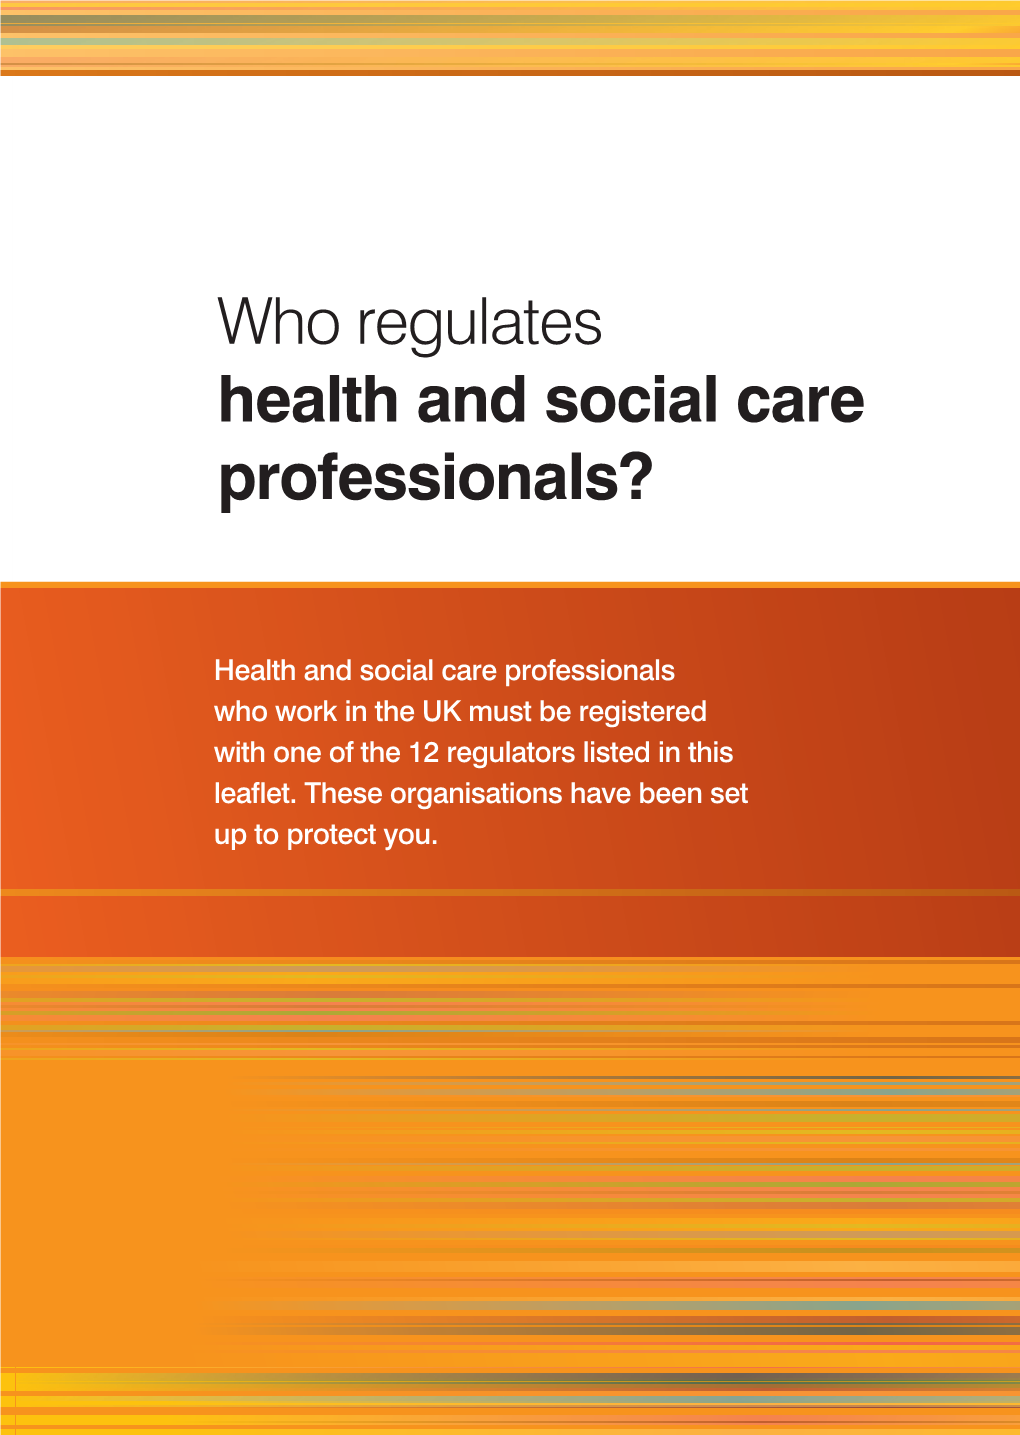 Who Regulates Health and Social Care Professionals?